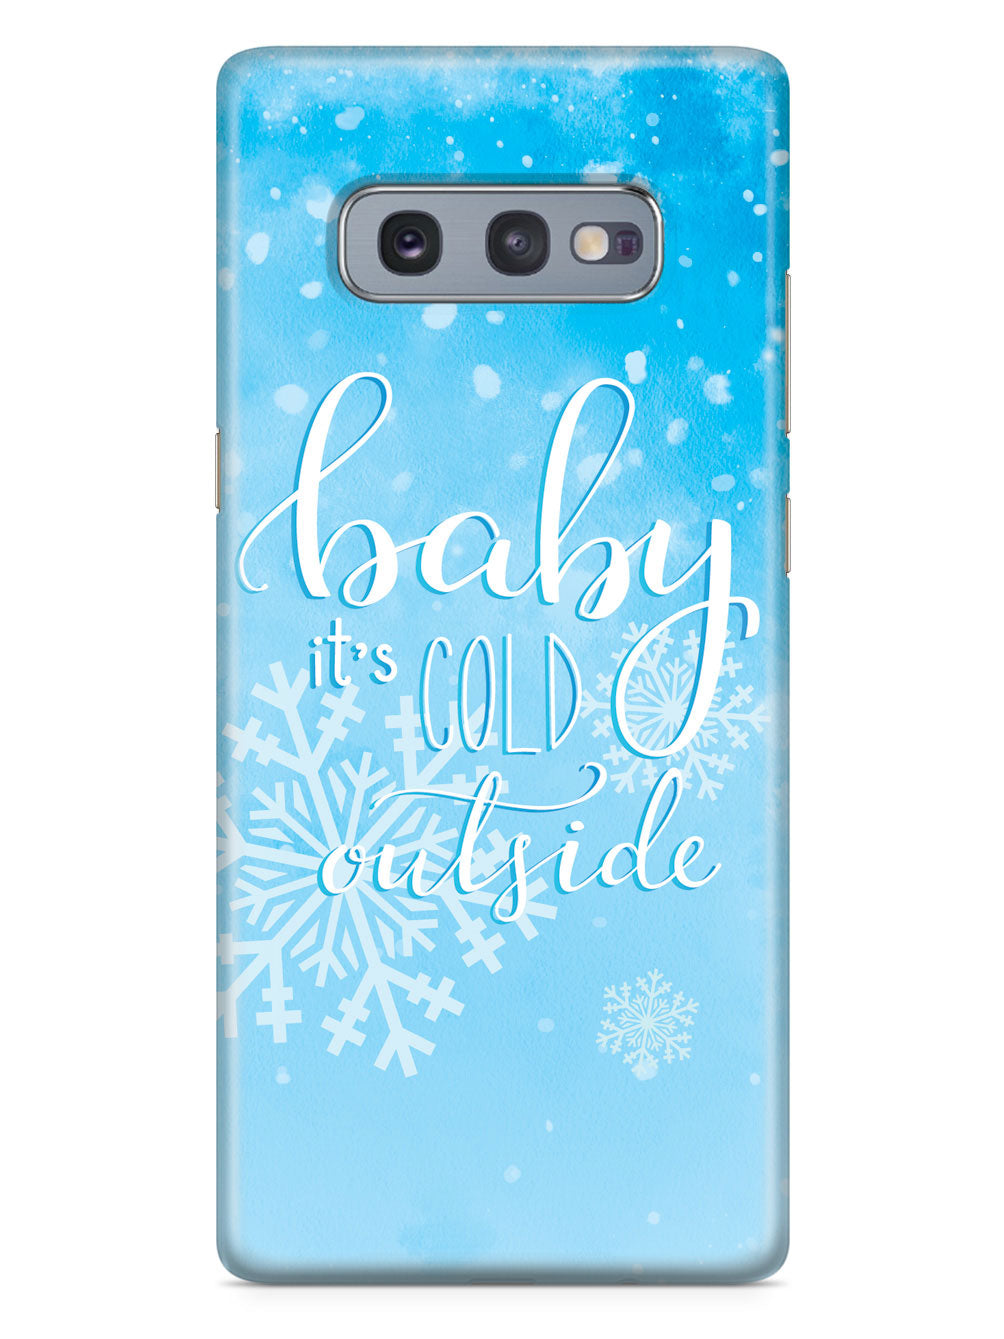 Baby It's Cold Outside - Winter Case